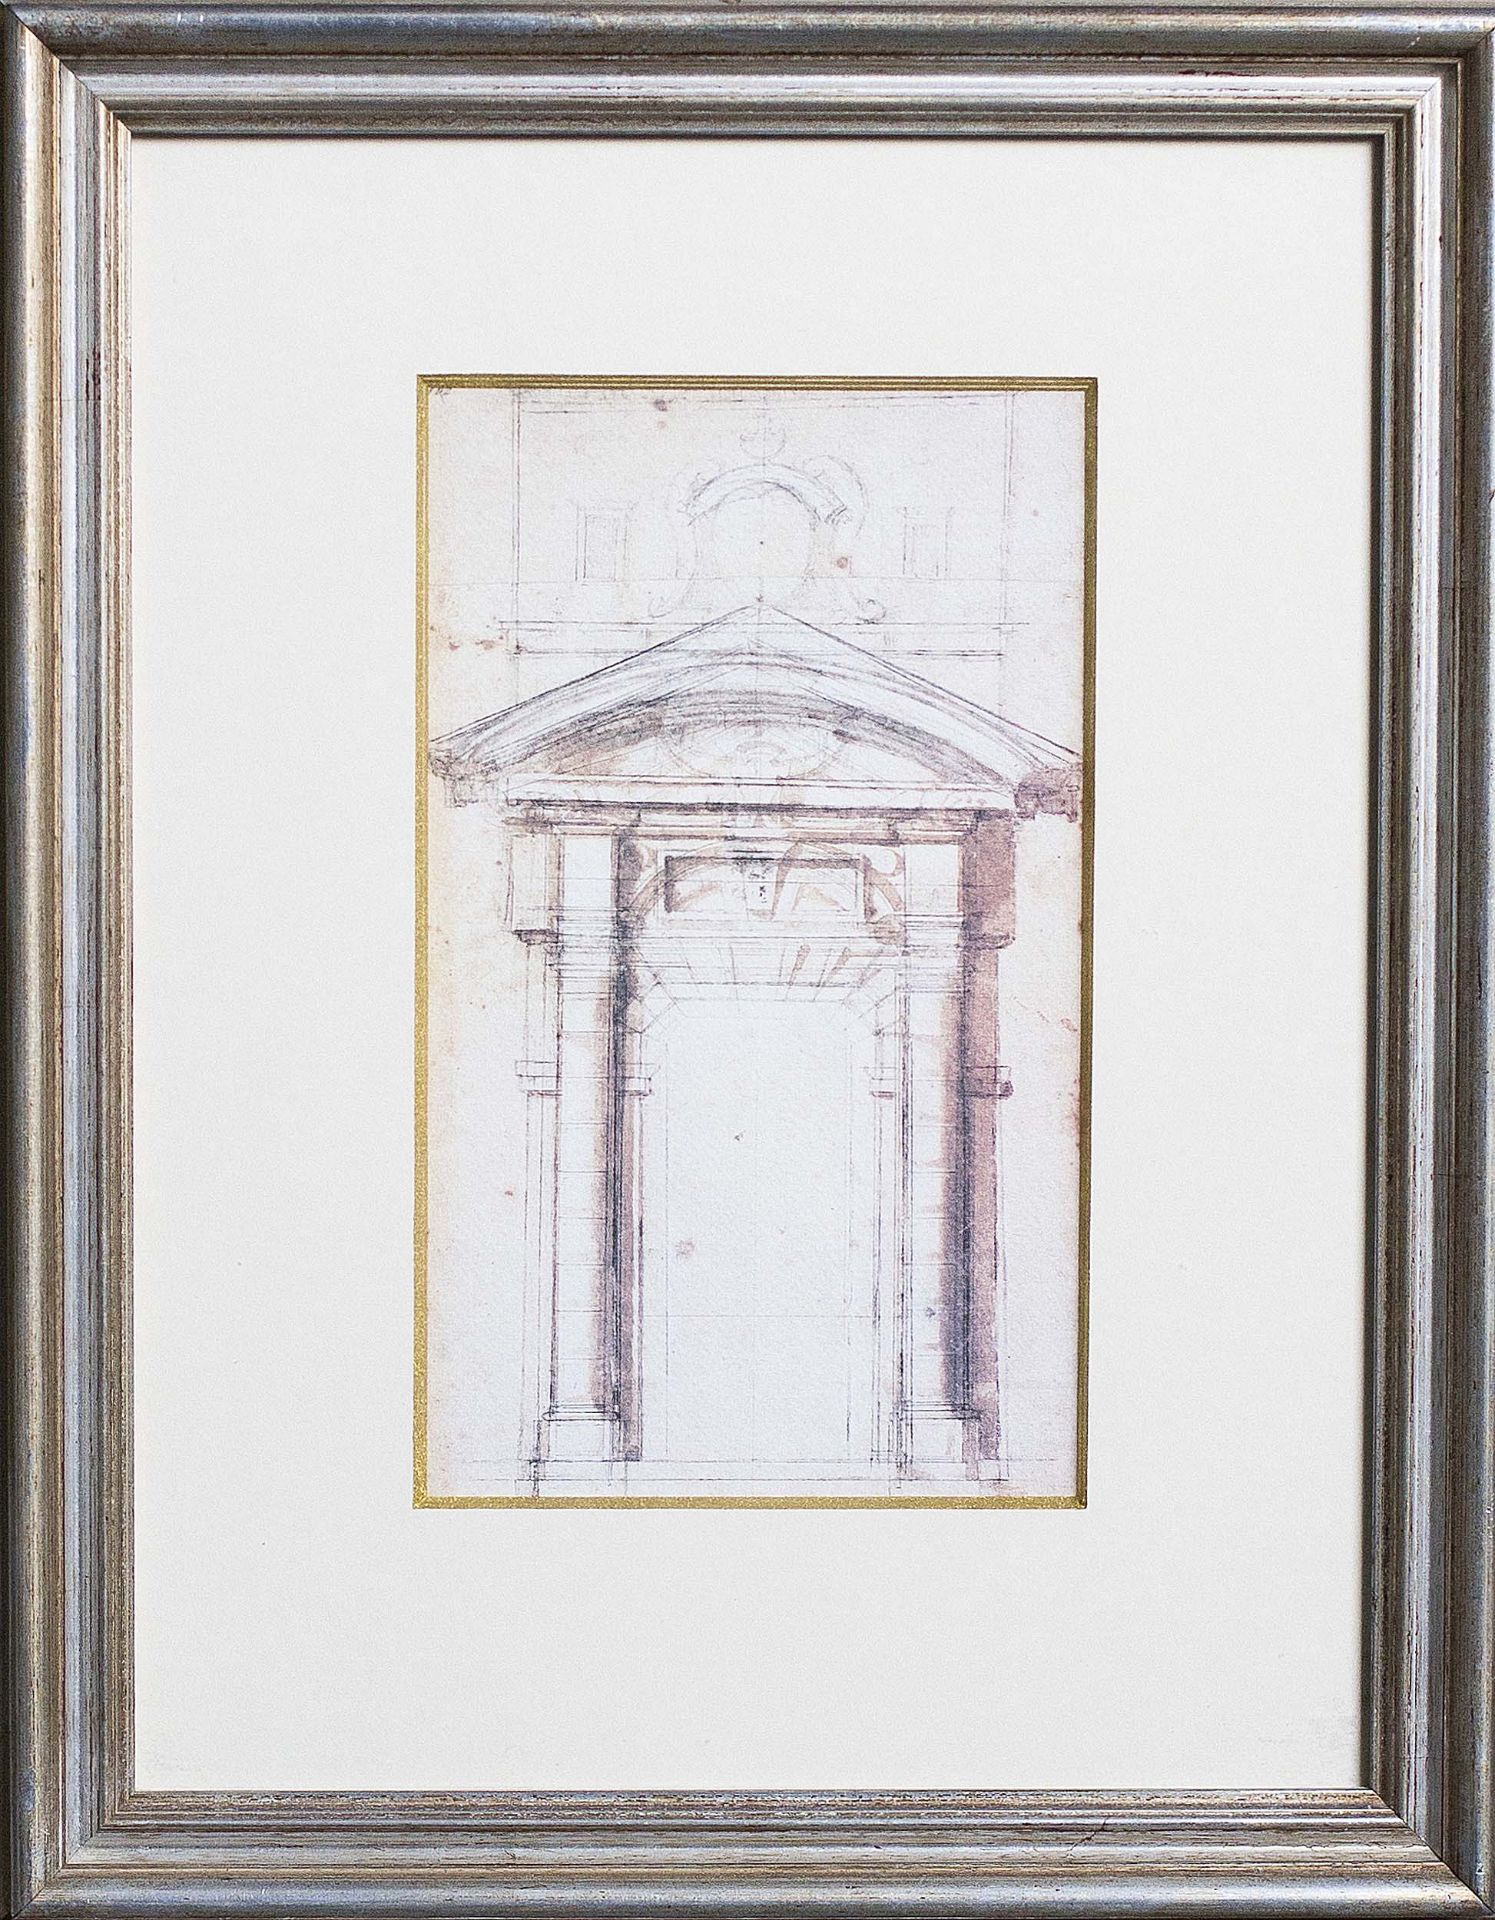 Series of six prints of a Roman temple entrance in a silver frame 49 x 39cm - Image 5 of 6